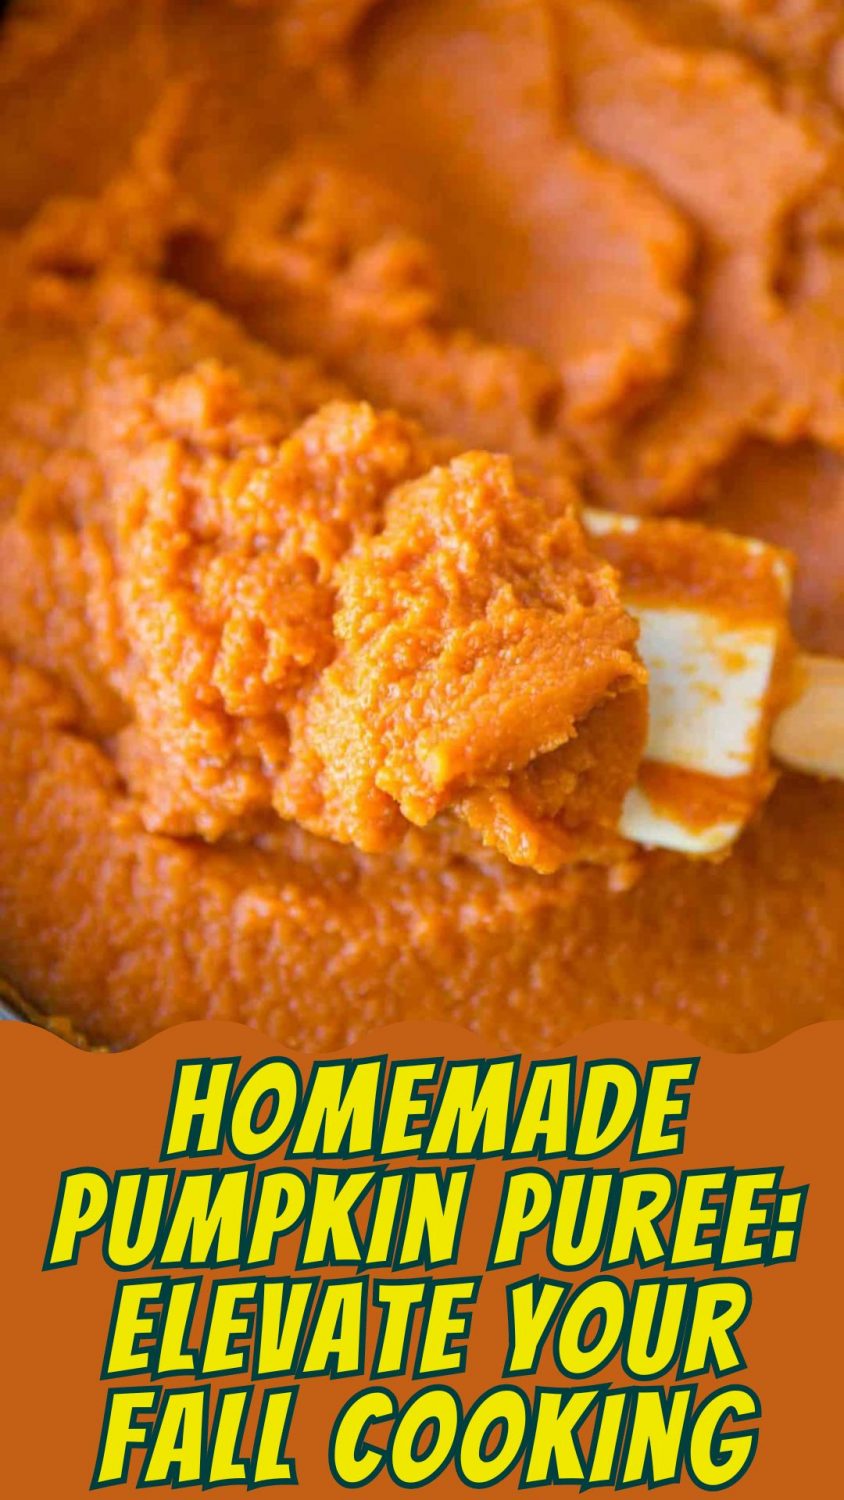 Homemade Pumpkin Puree: Elevate Your Fall Cooking